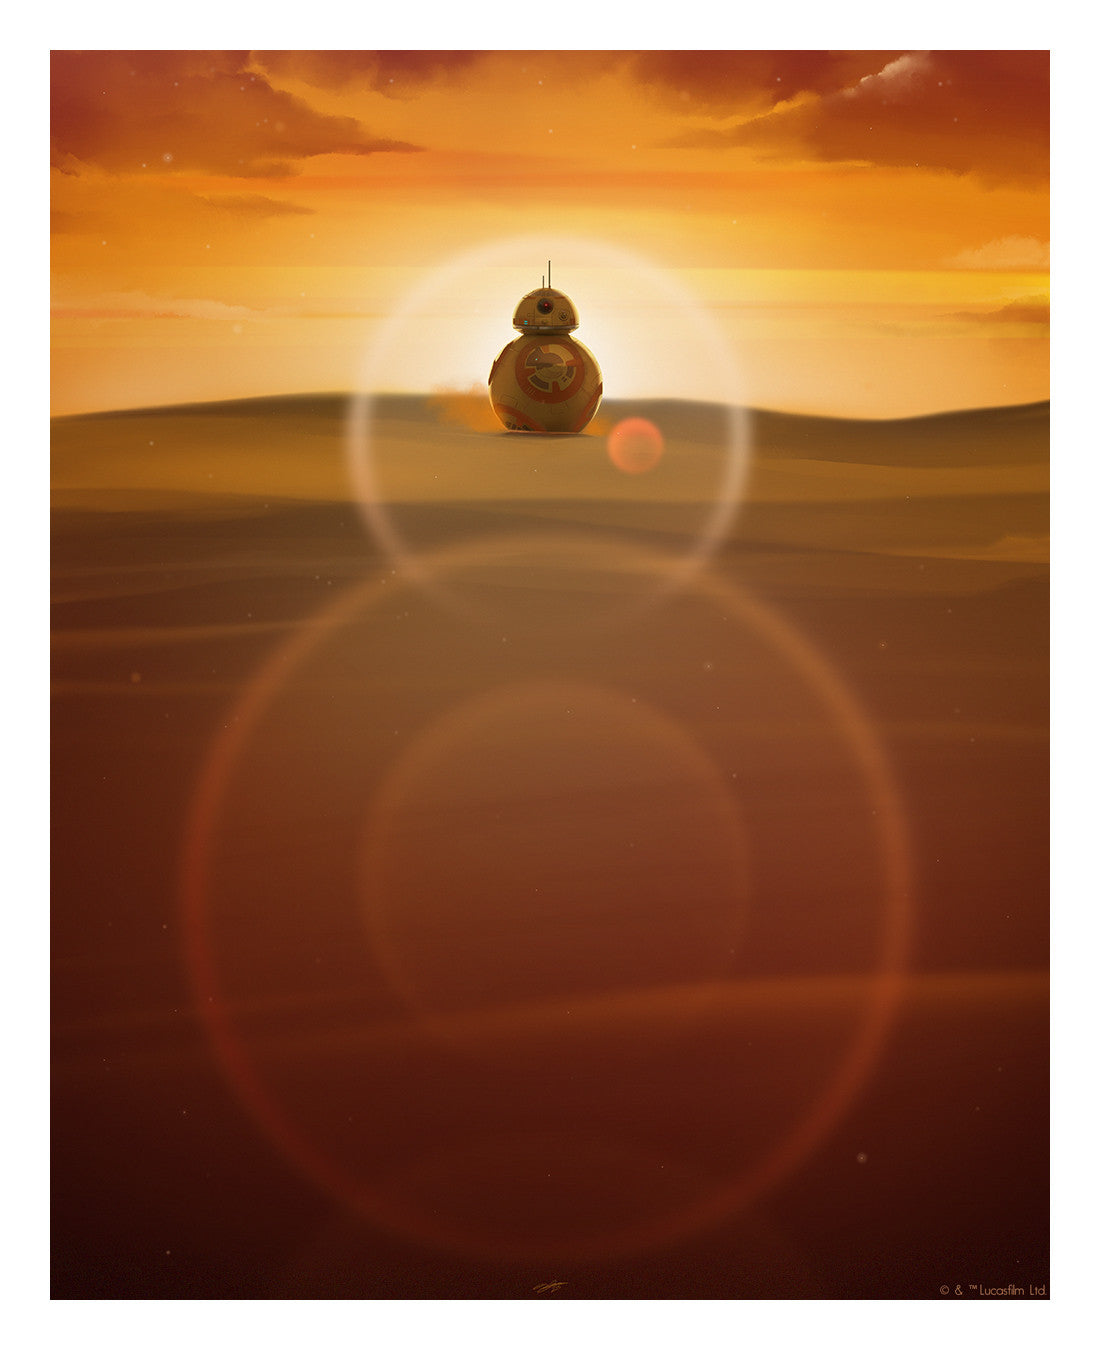 Andy Fairhurst "Where Do You Come From?"